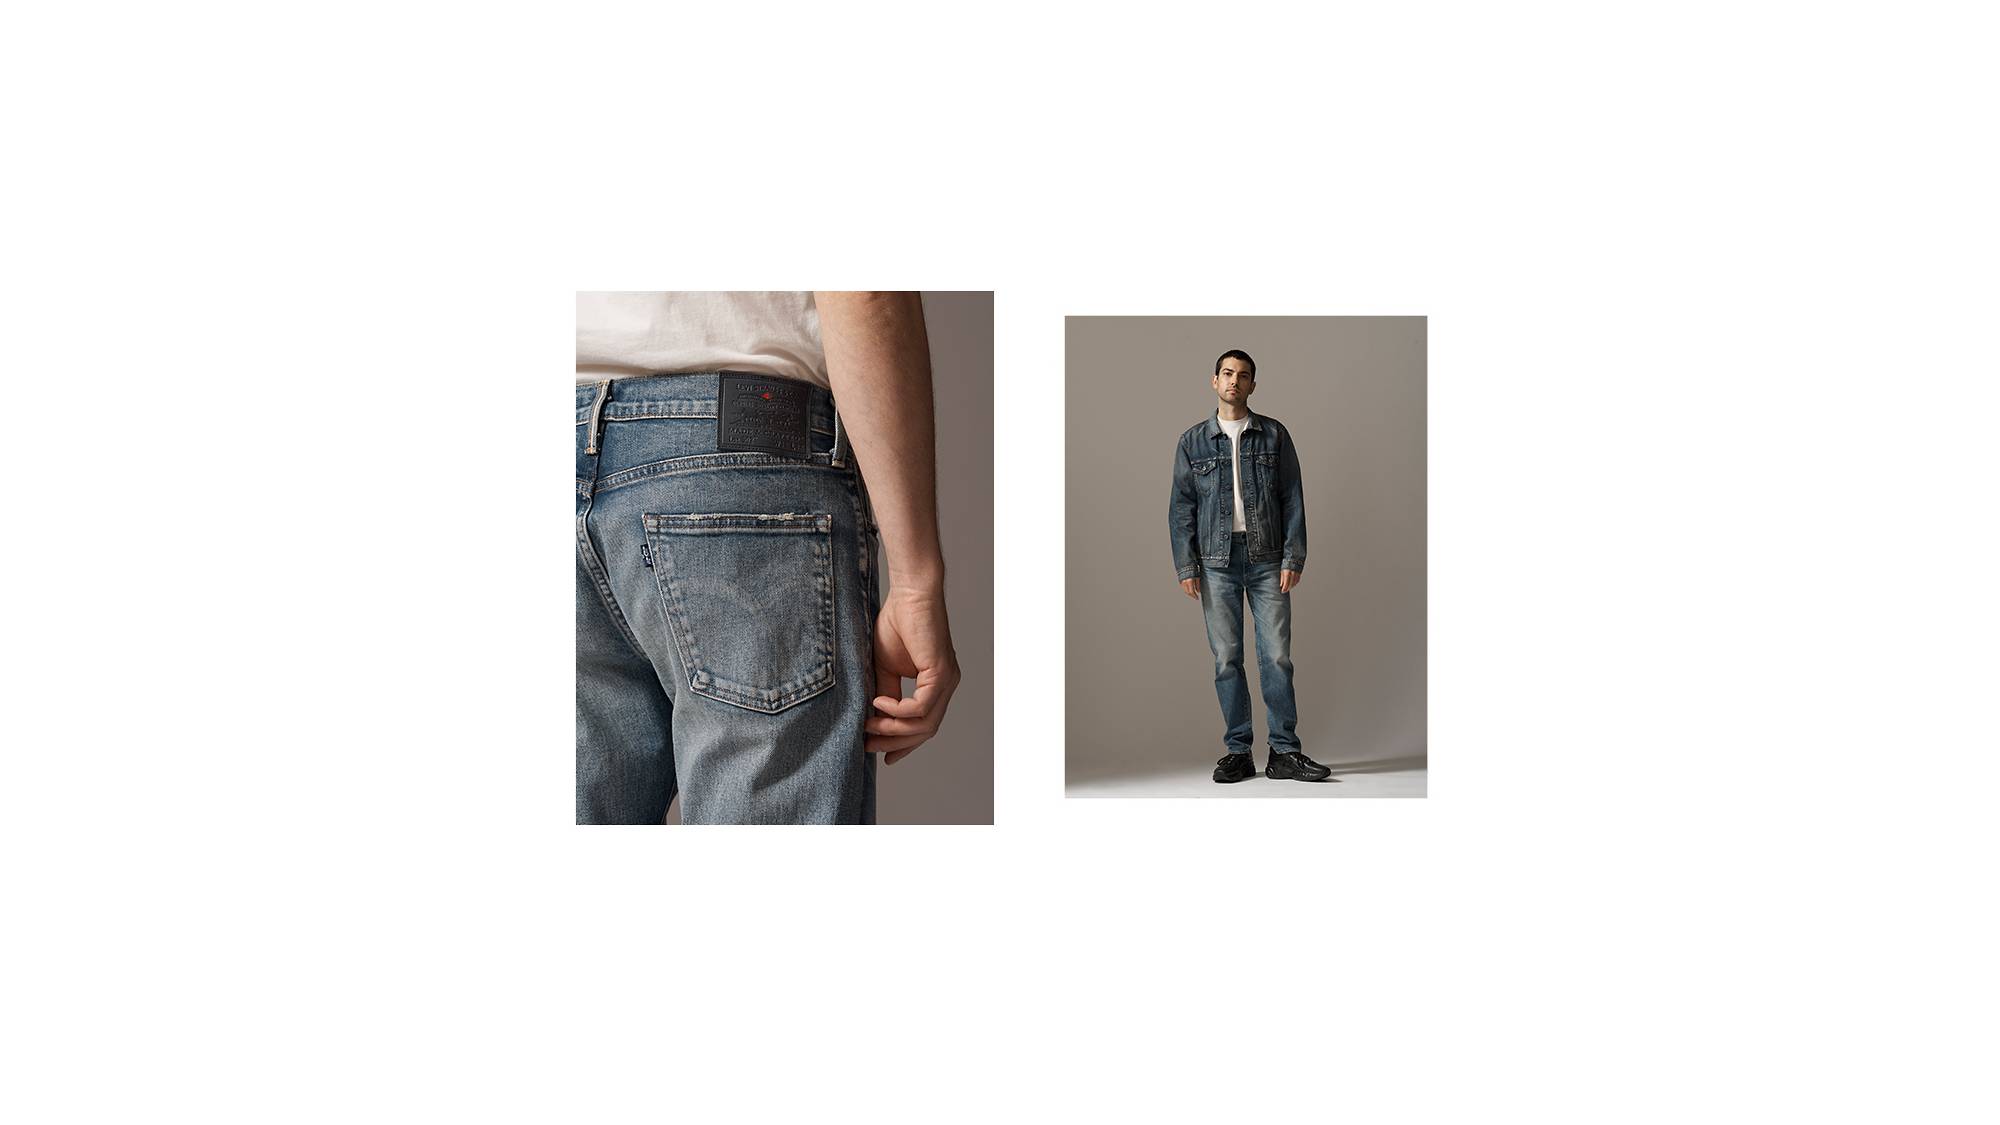 A collage of the back pocket of a man's pair of jeans and an image of a man standing while wearing jeans, a white tee, and a jean jacket.